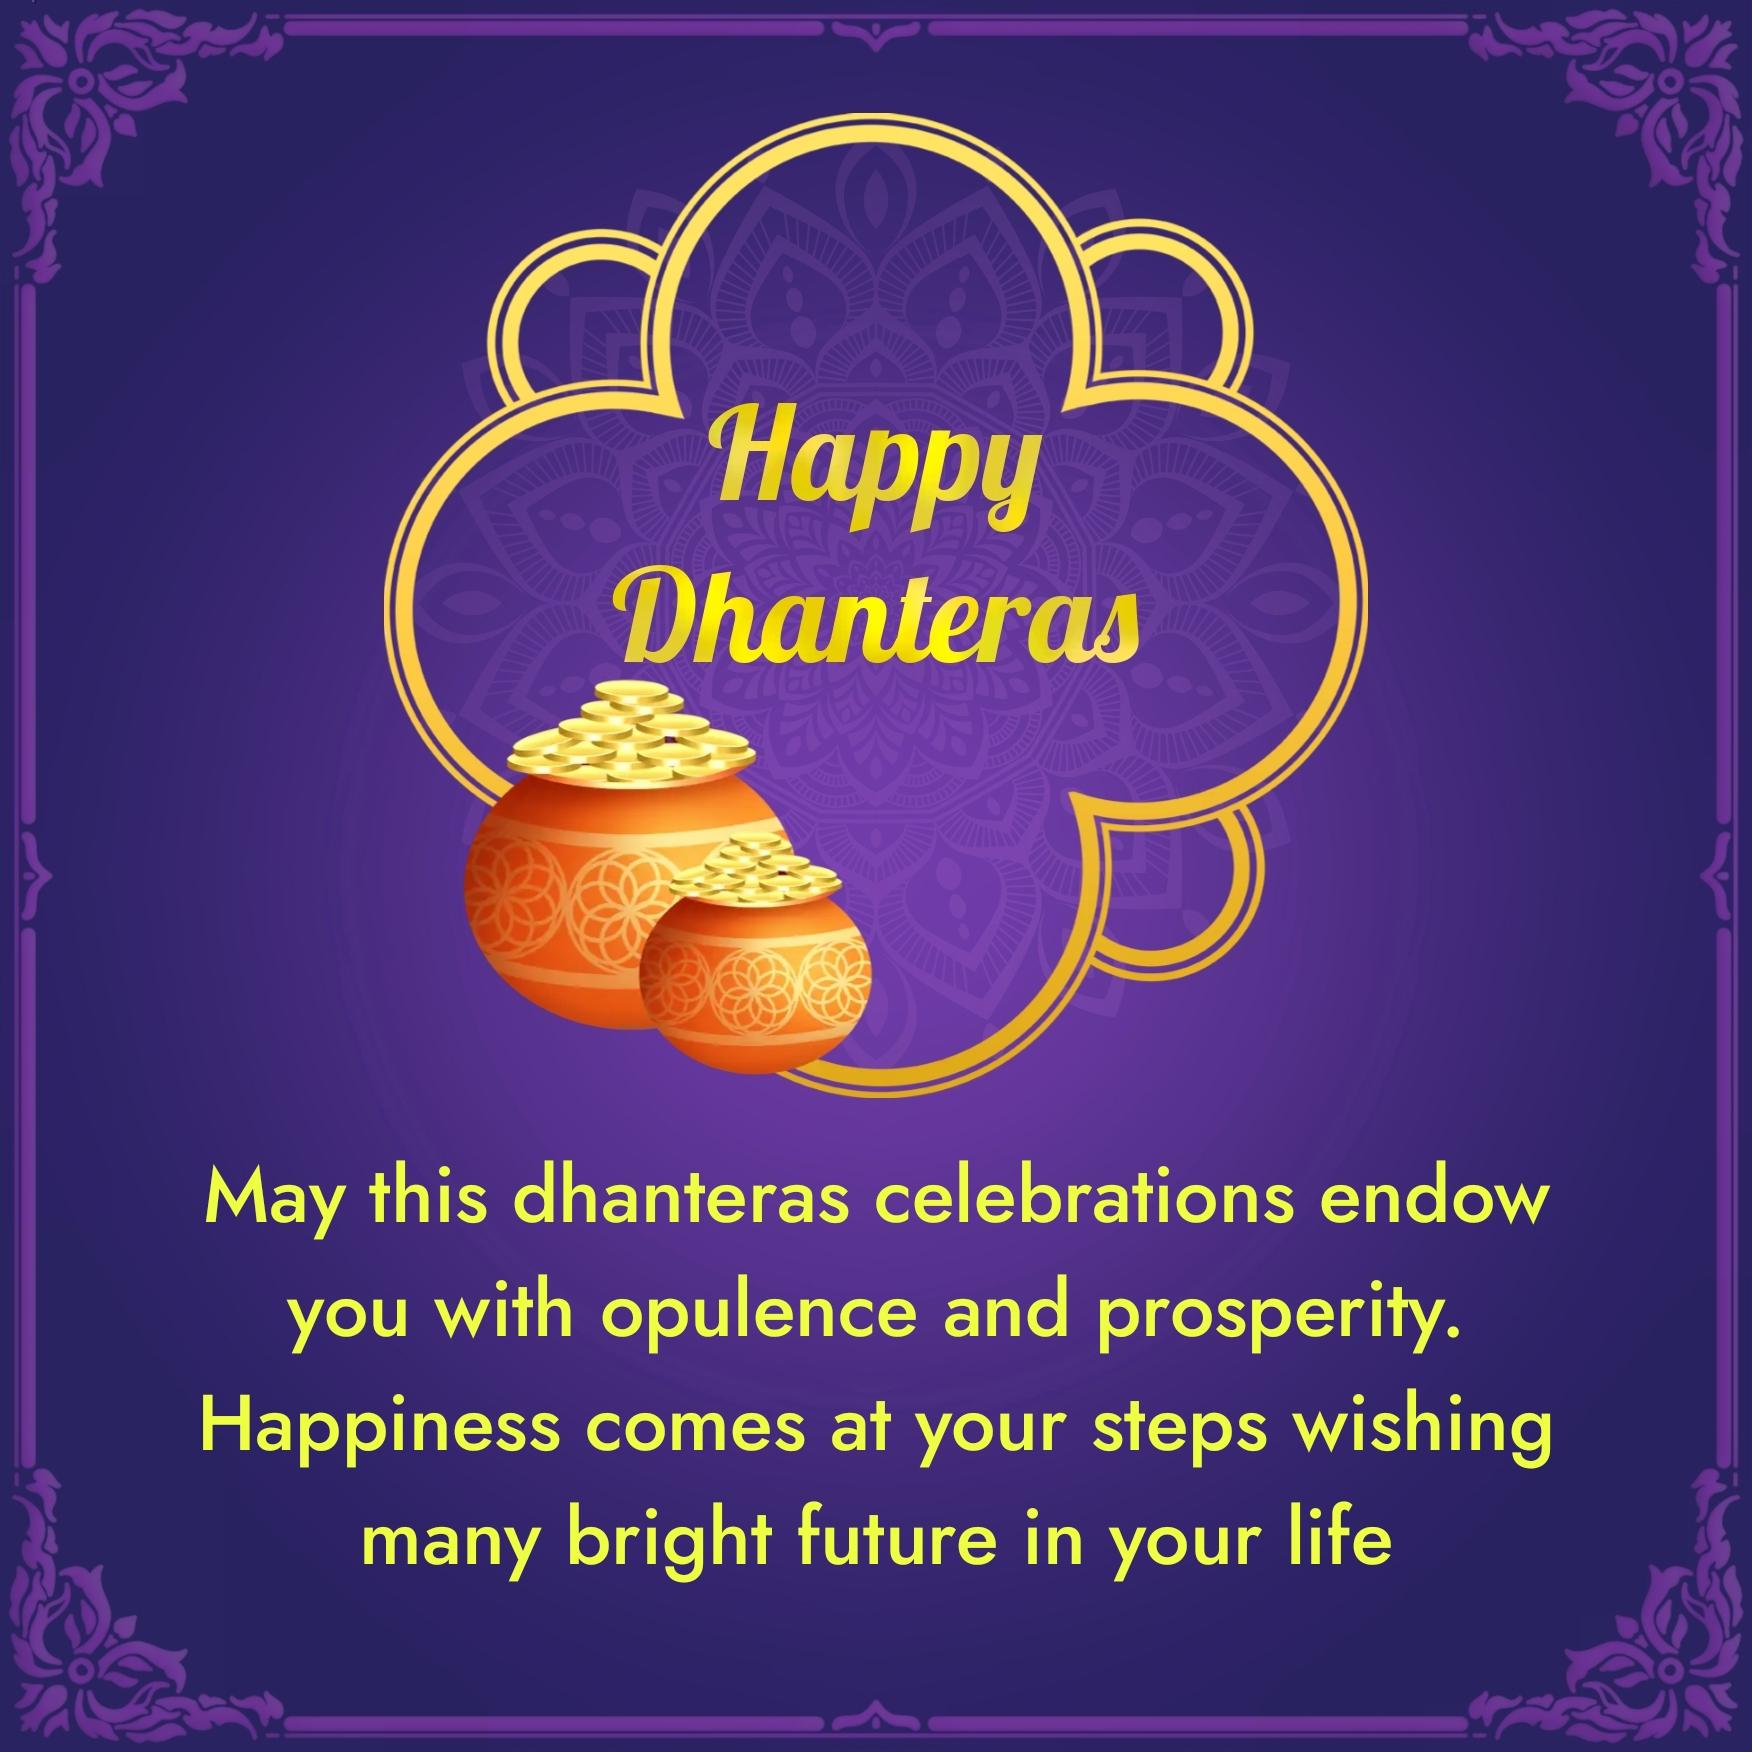 May this dhanteras celebrations endow you with opulence